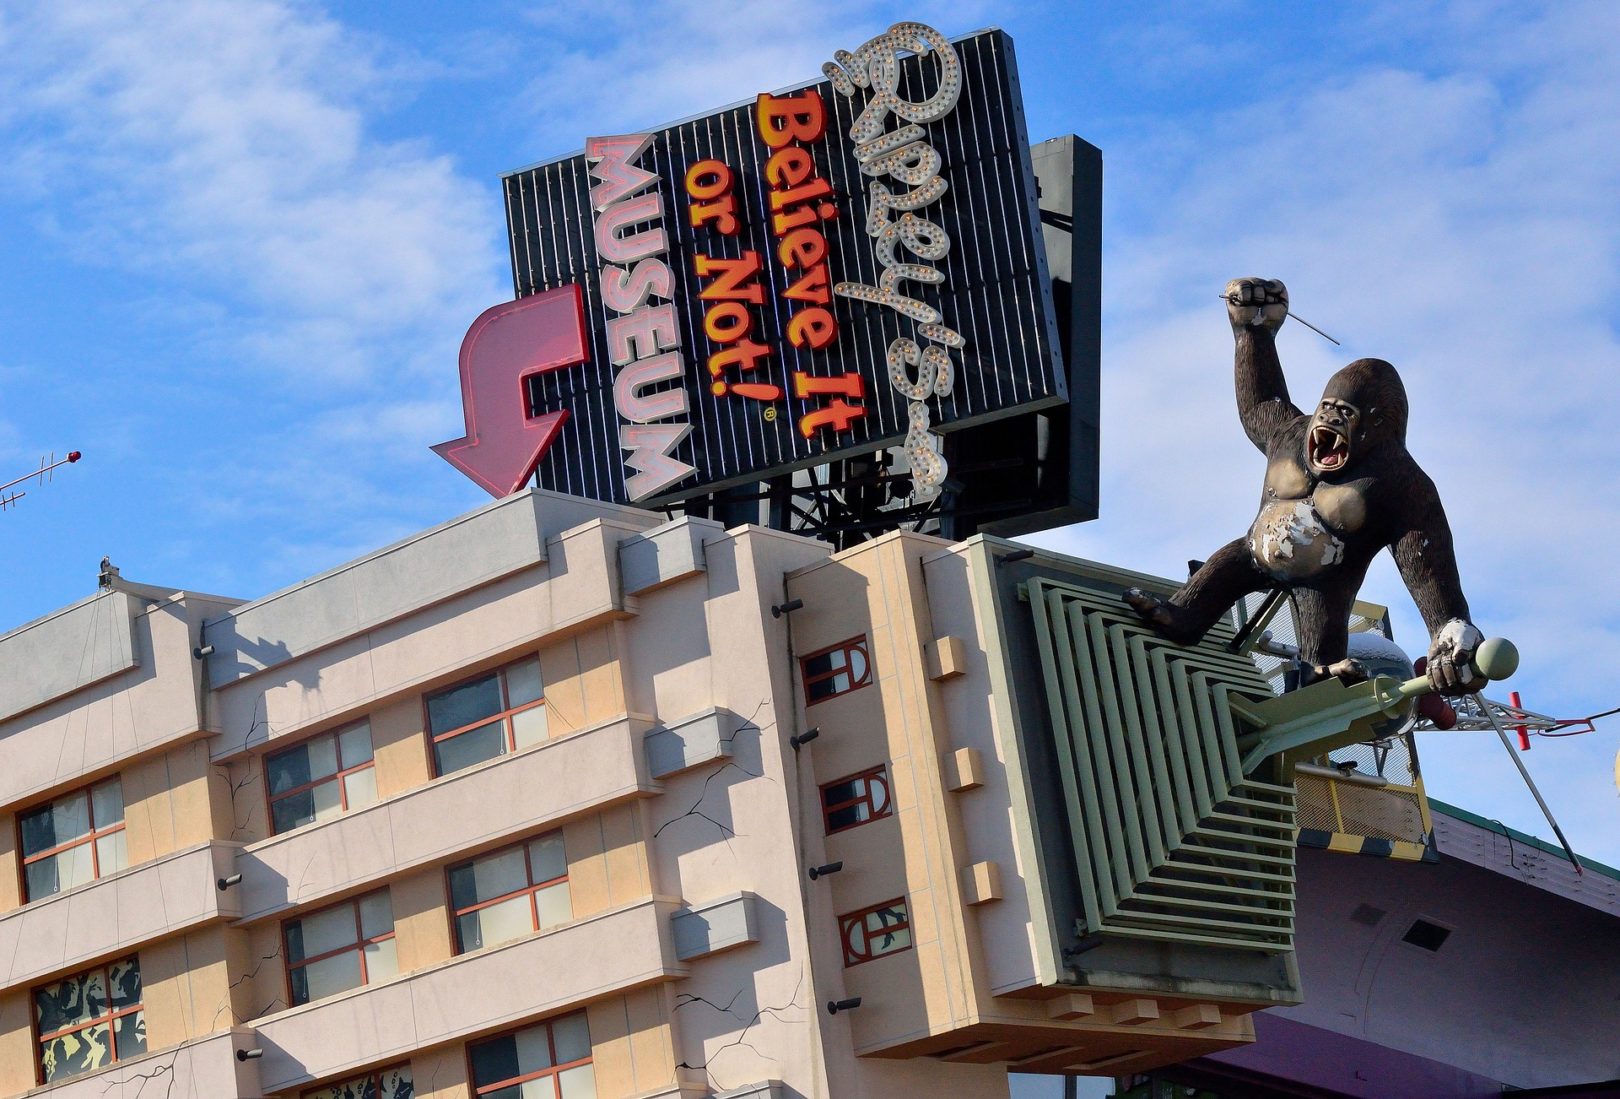 Ripley's attractions are great for students